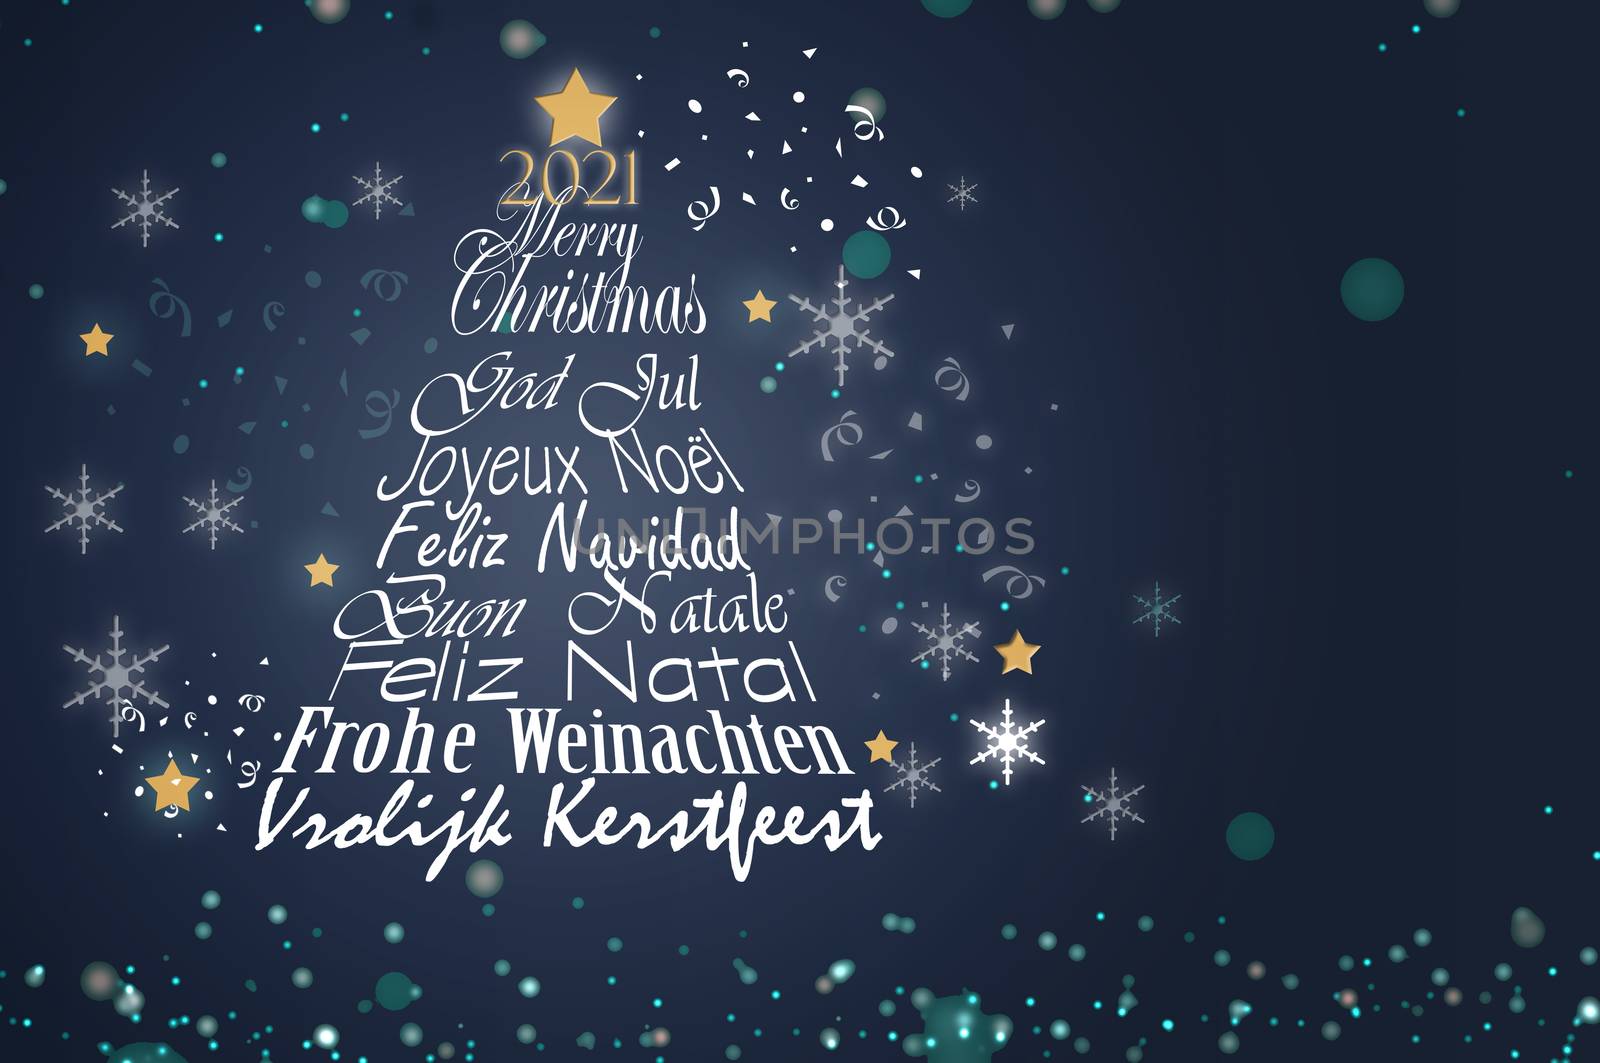 Christmas tree shape from text Merry Christmas in different European languages English, French, German, Portuguese, Italian, Spanish, Swedish, Dutch on shiny blue background. Illustration.